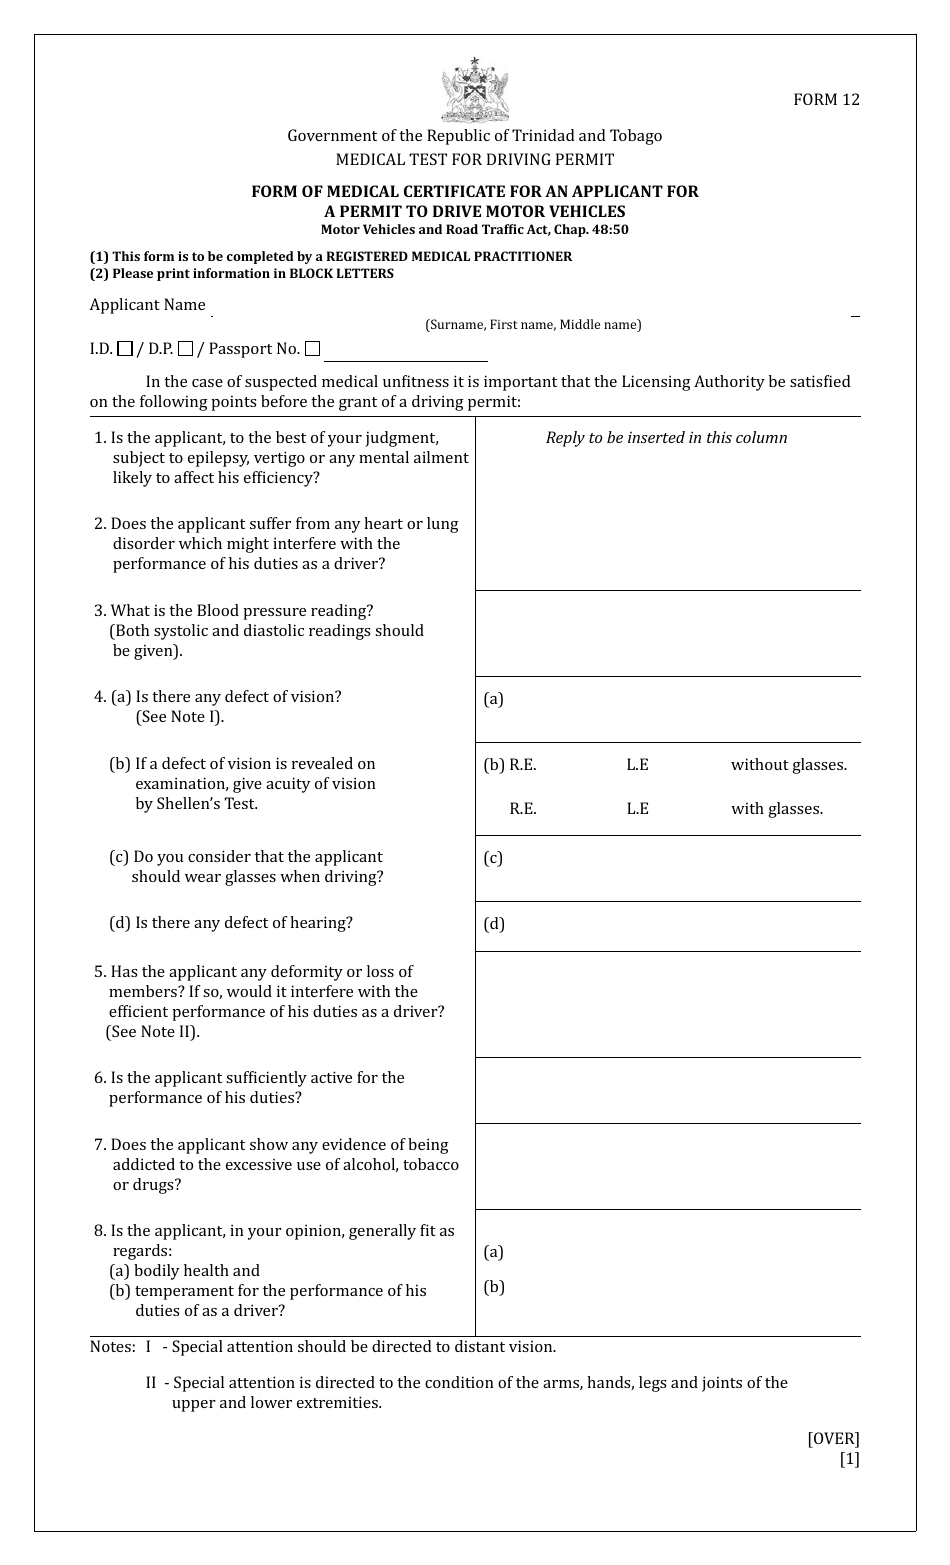 Form 12 Form of Medical Certificate for an Applicant for a Permit to Drive Motor Vehicles - Trinidad and Tobago, Page 1